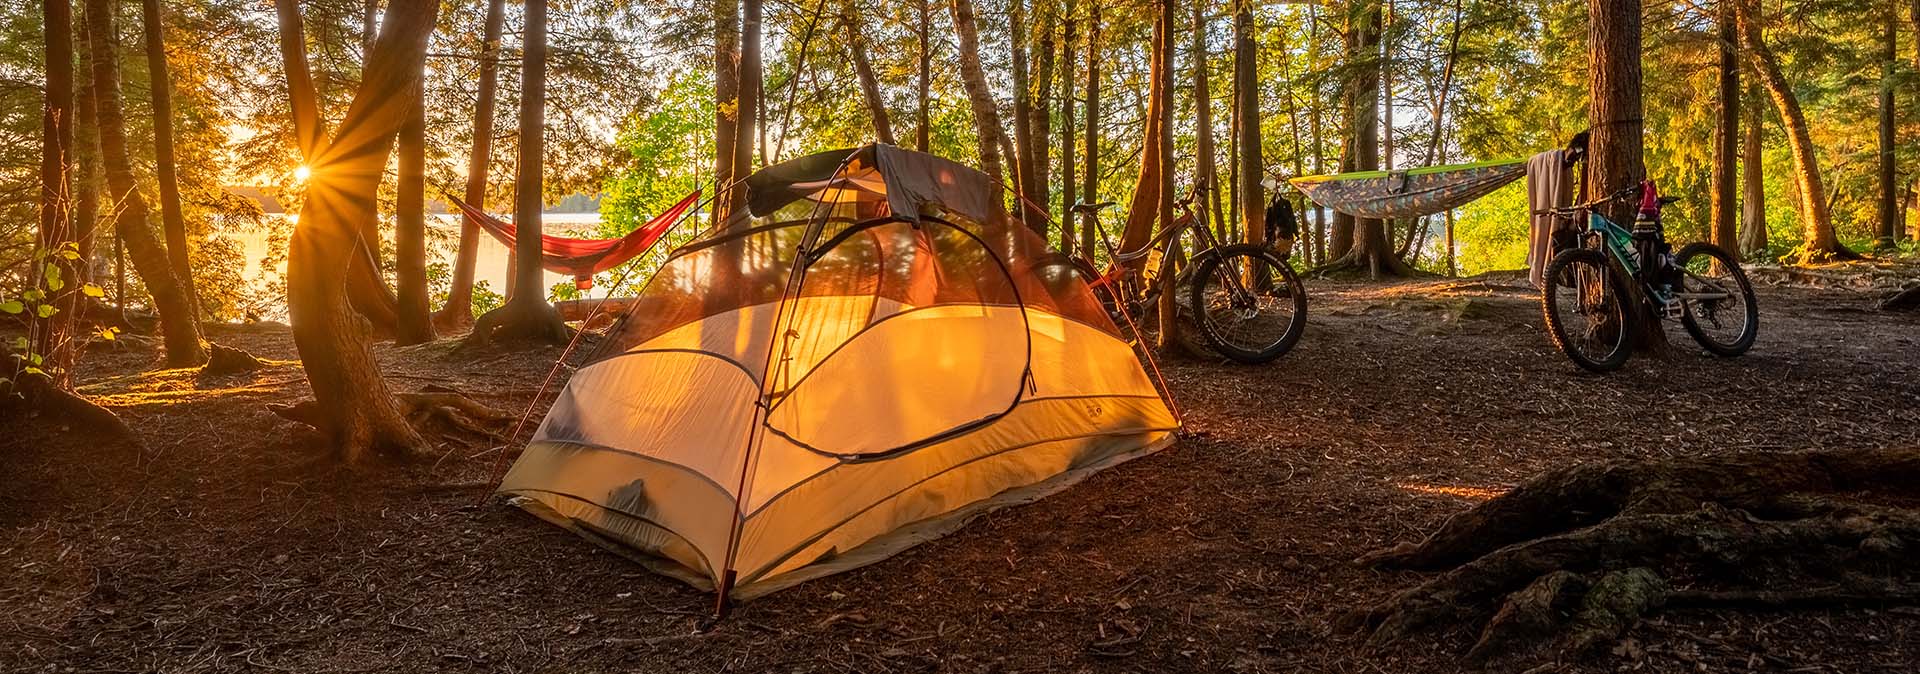 Wisconsin Camping - Experience